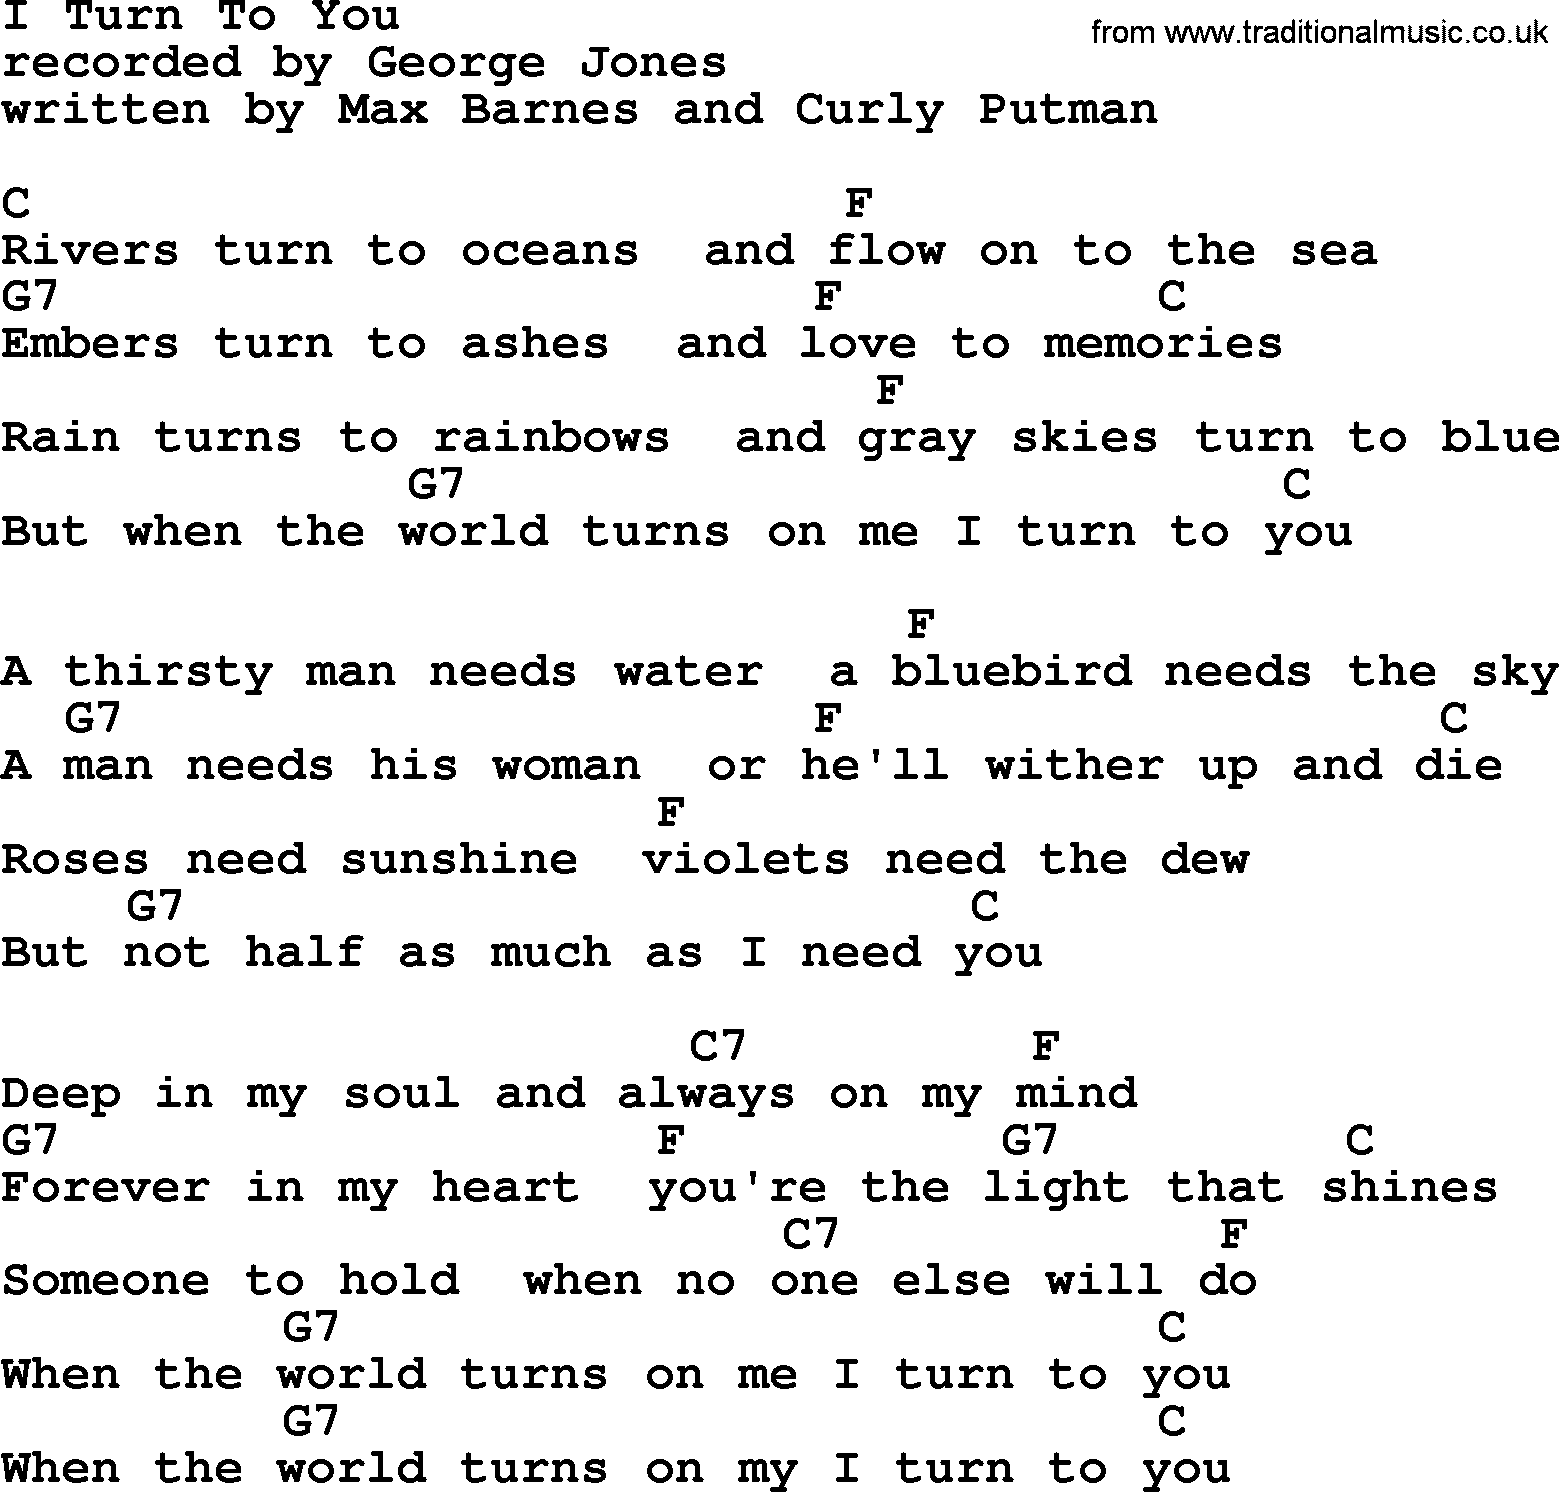 George Jones song: I Turn To You, lyrics and chords